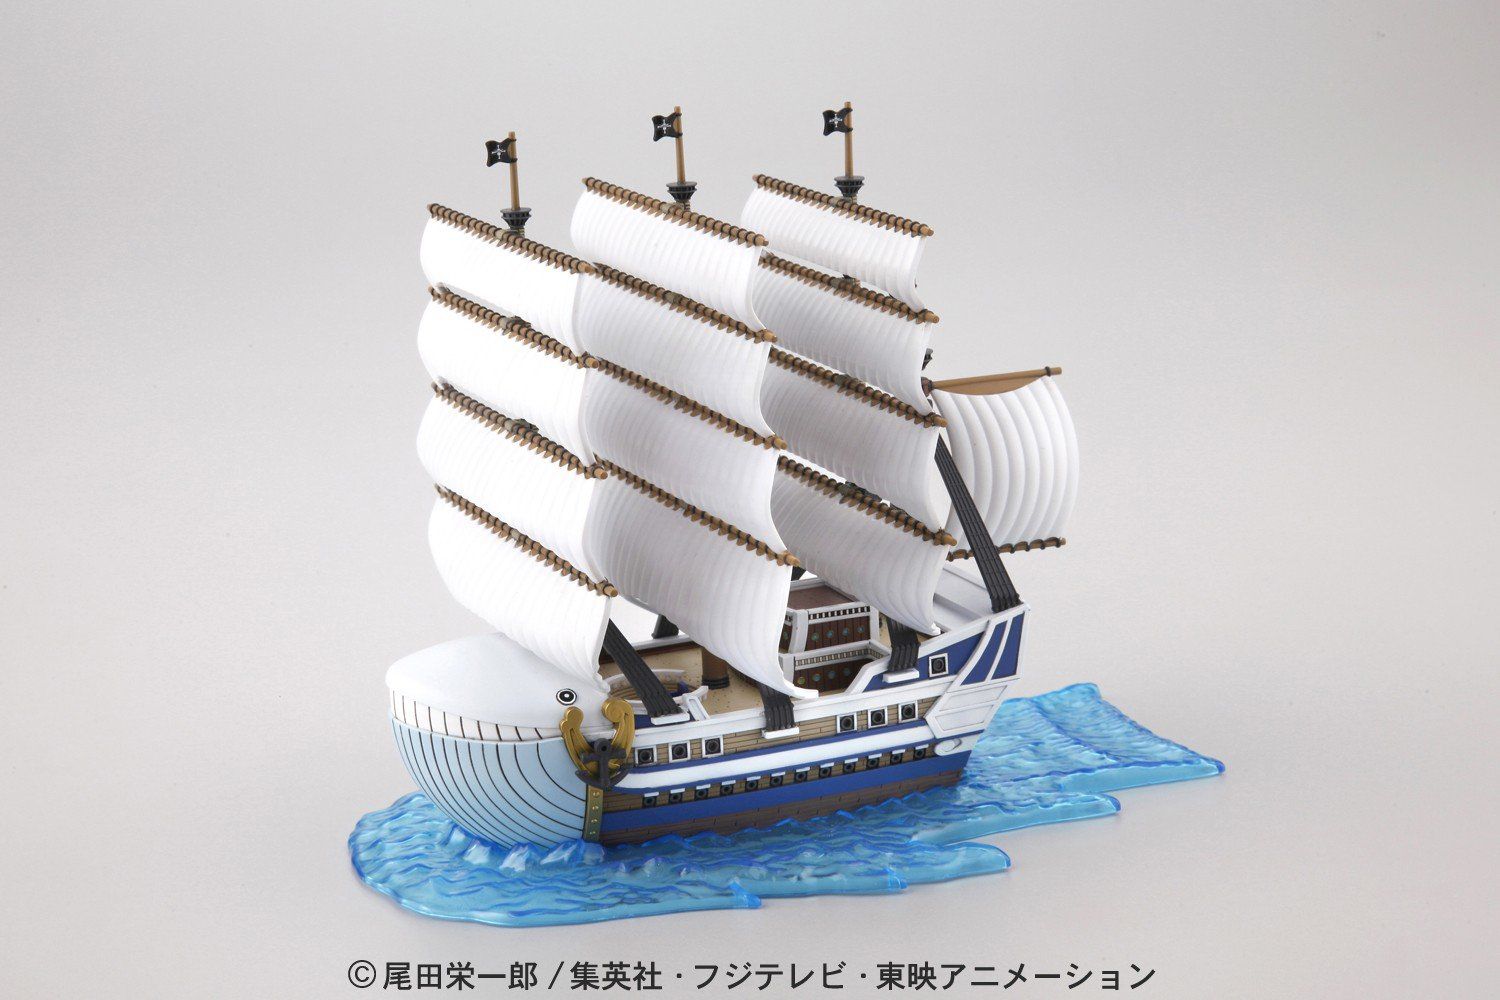 Moby Dick Grand Ship Collection 05 - One Piece Bandai | Glacier Hobbies